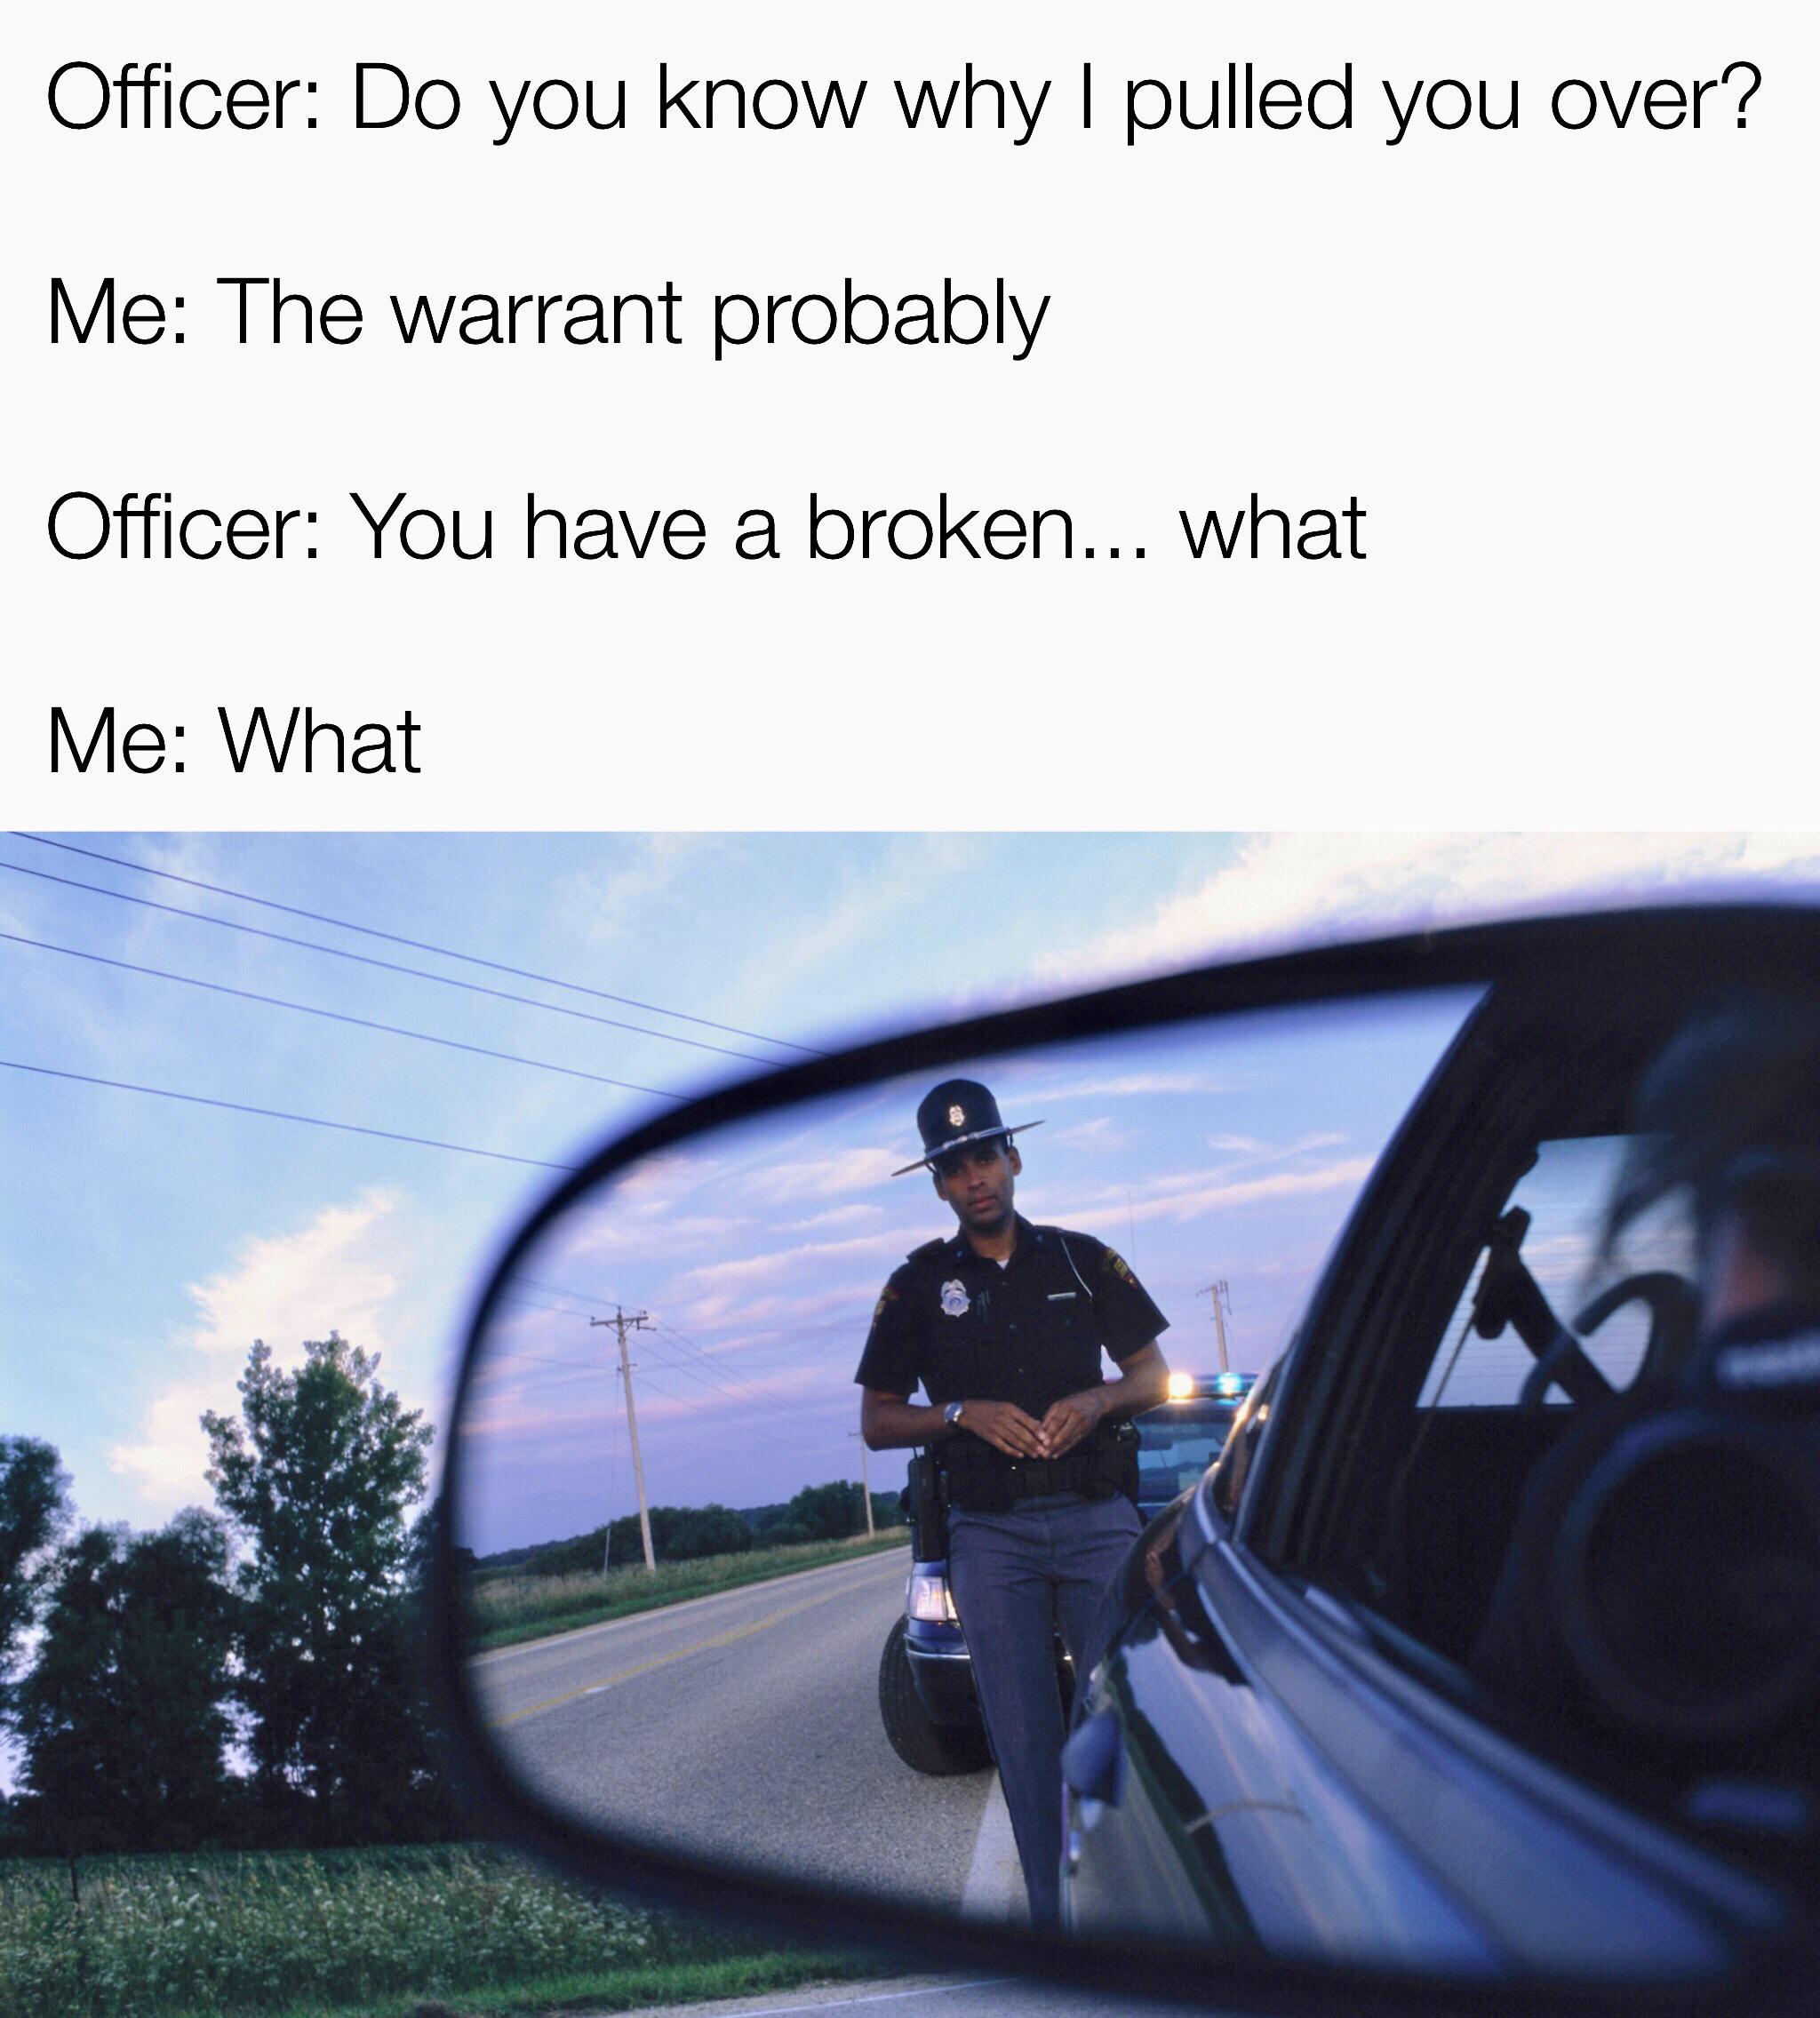 speeding ticket - Officer Do you know why I pulled you over? Me The warrant probably Officer You have a broken... what Me What